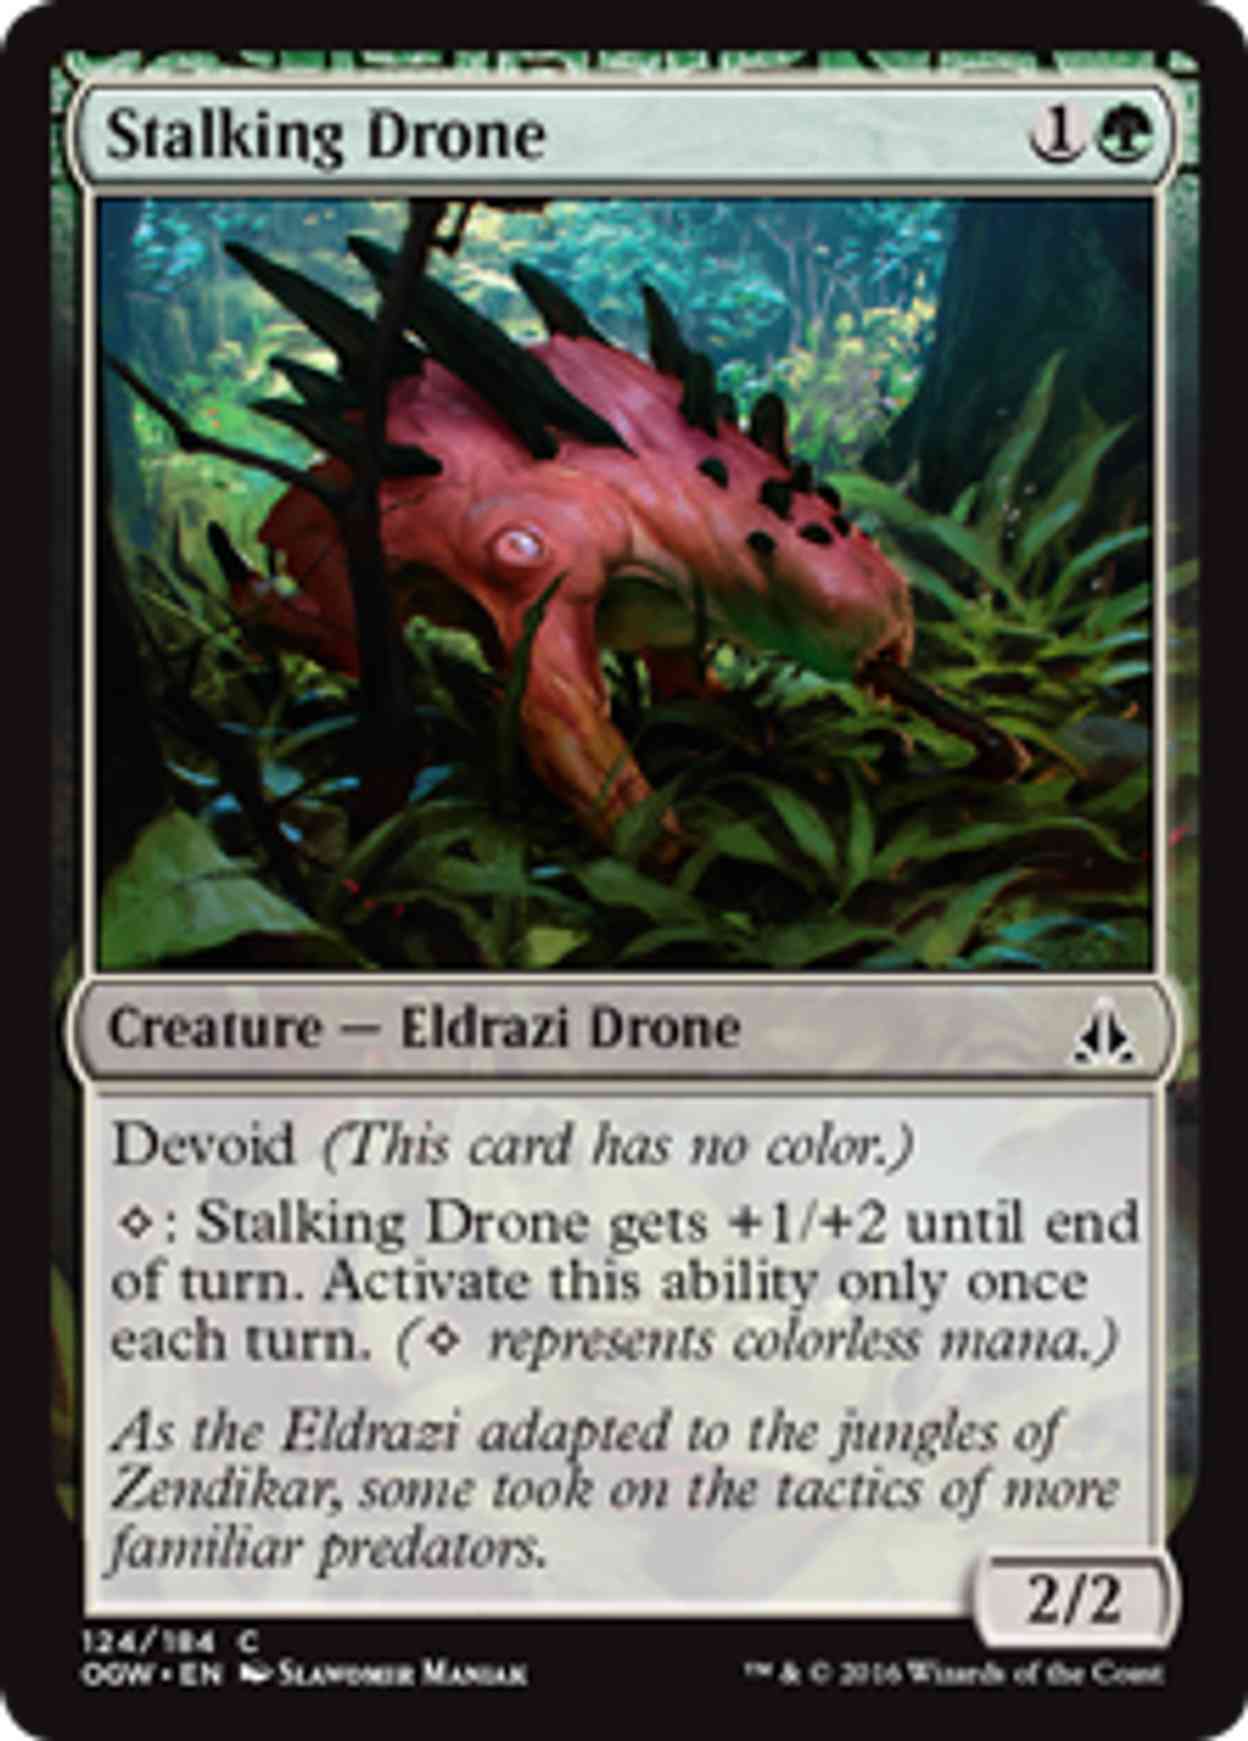 Stalking Drone magic card front